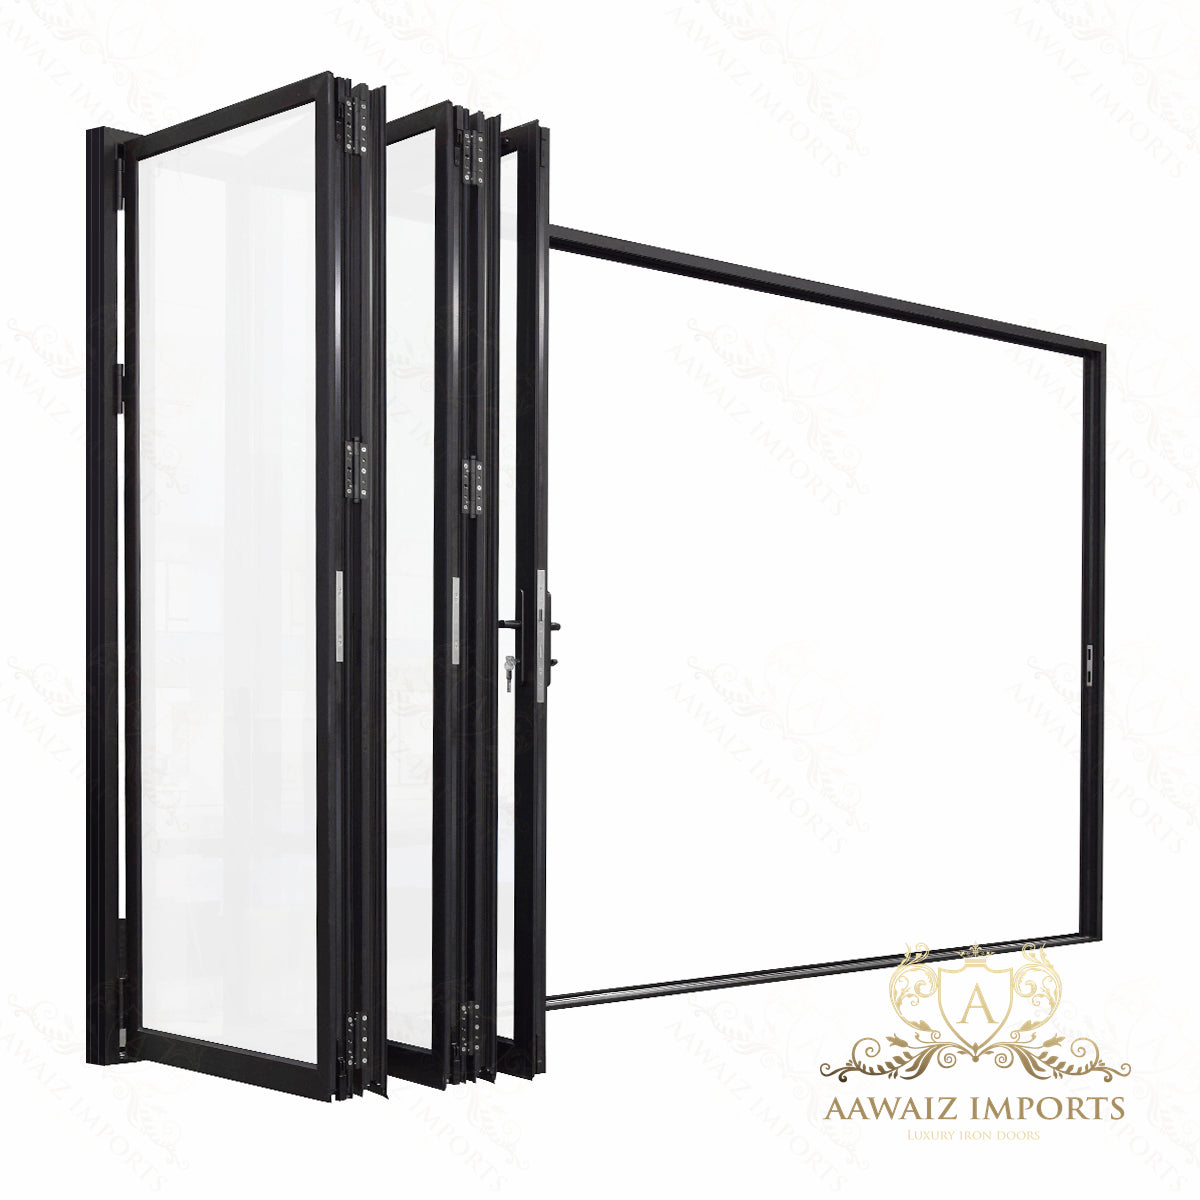 14 Ft Wide By 7 Ft Tall (168" By 84") Aluminum Bi Fold Patio Door  Outswing  Thermal Break Insulated Matt Black Finish